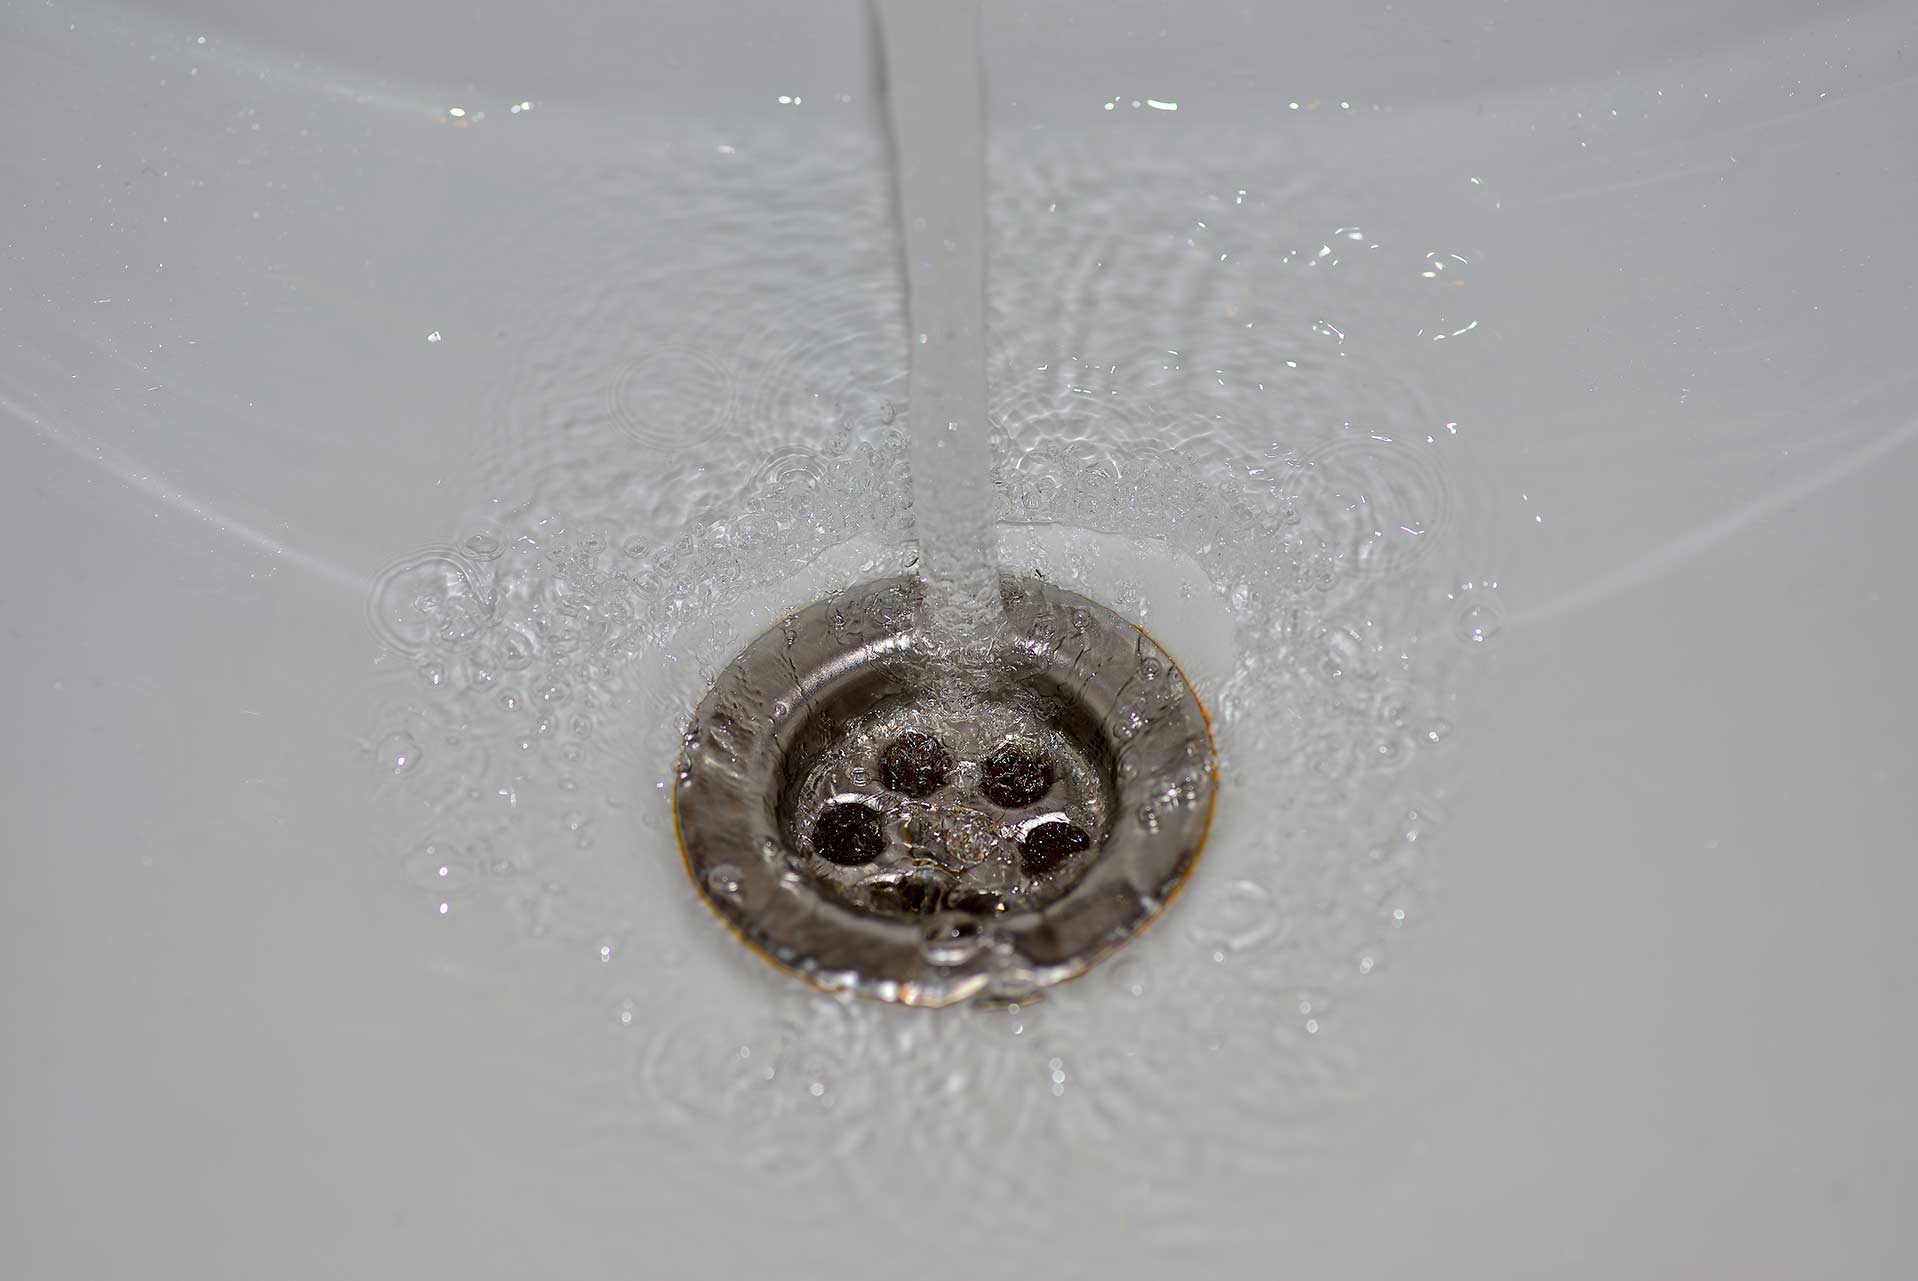 A2B Drains provides services to unblock blocked sinks and drains for properties in Aldershot.